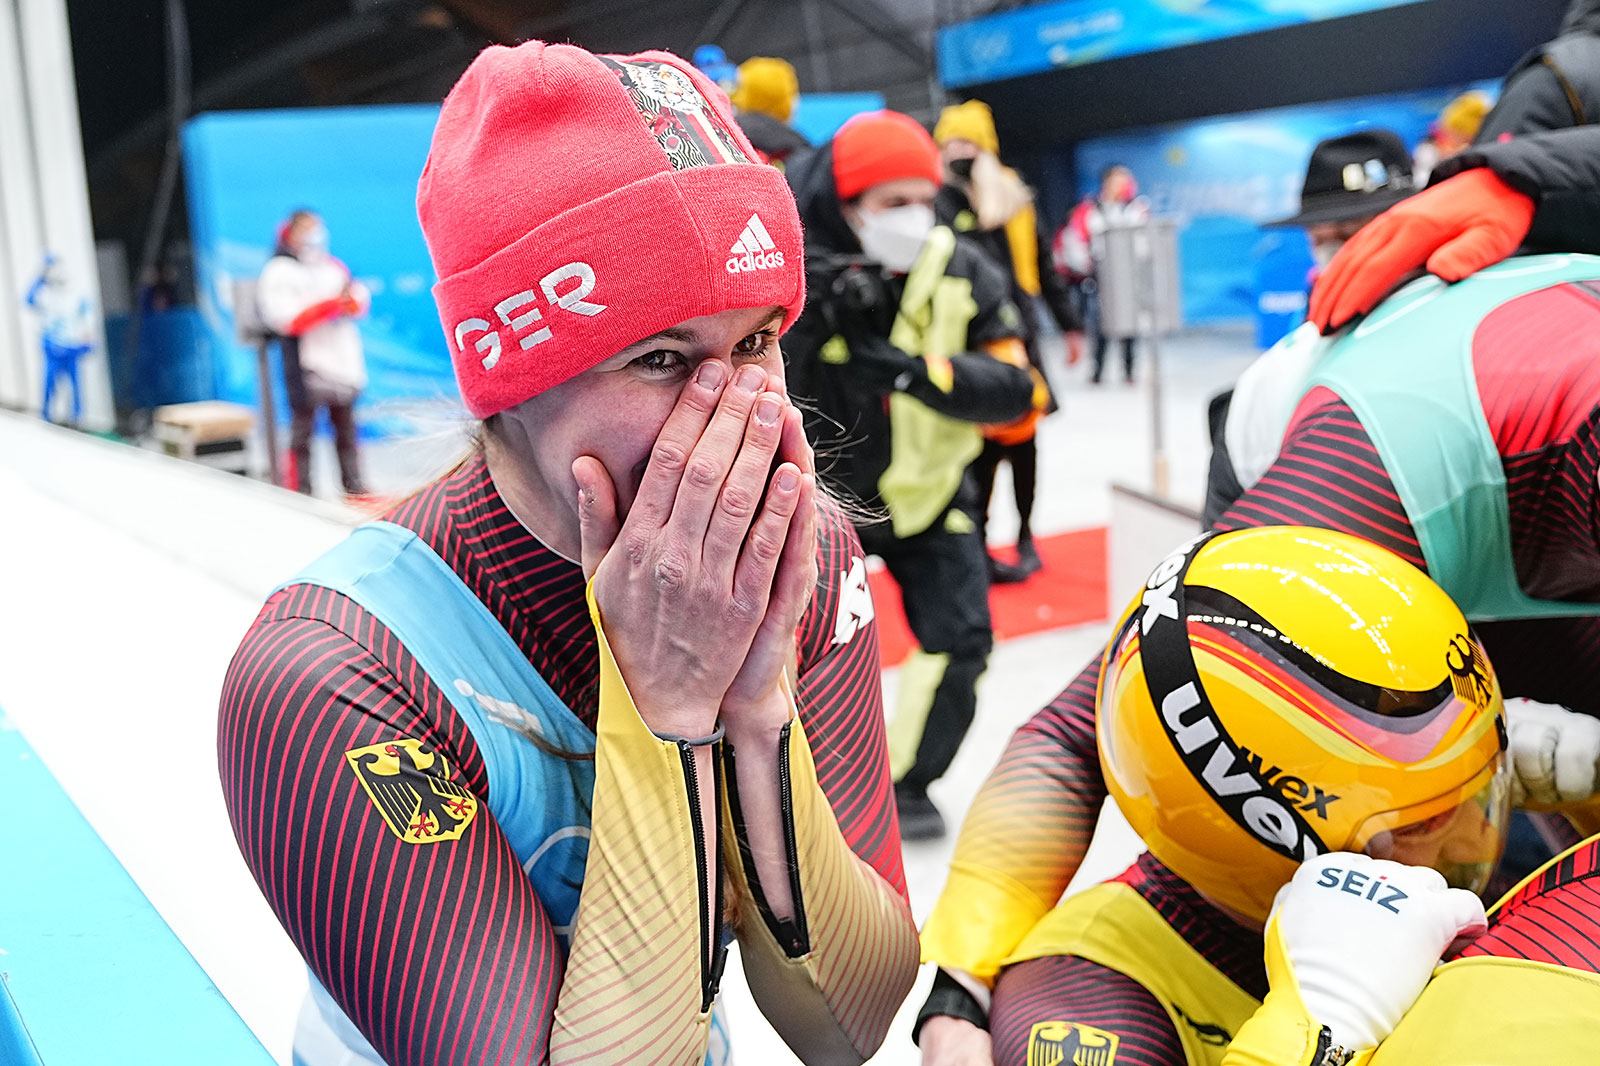 Germany's Natalie Geisenberger celebrates winning the team luge competition with her teammates on February 10.